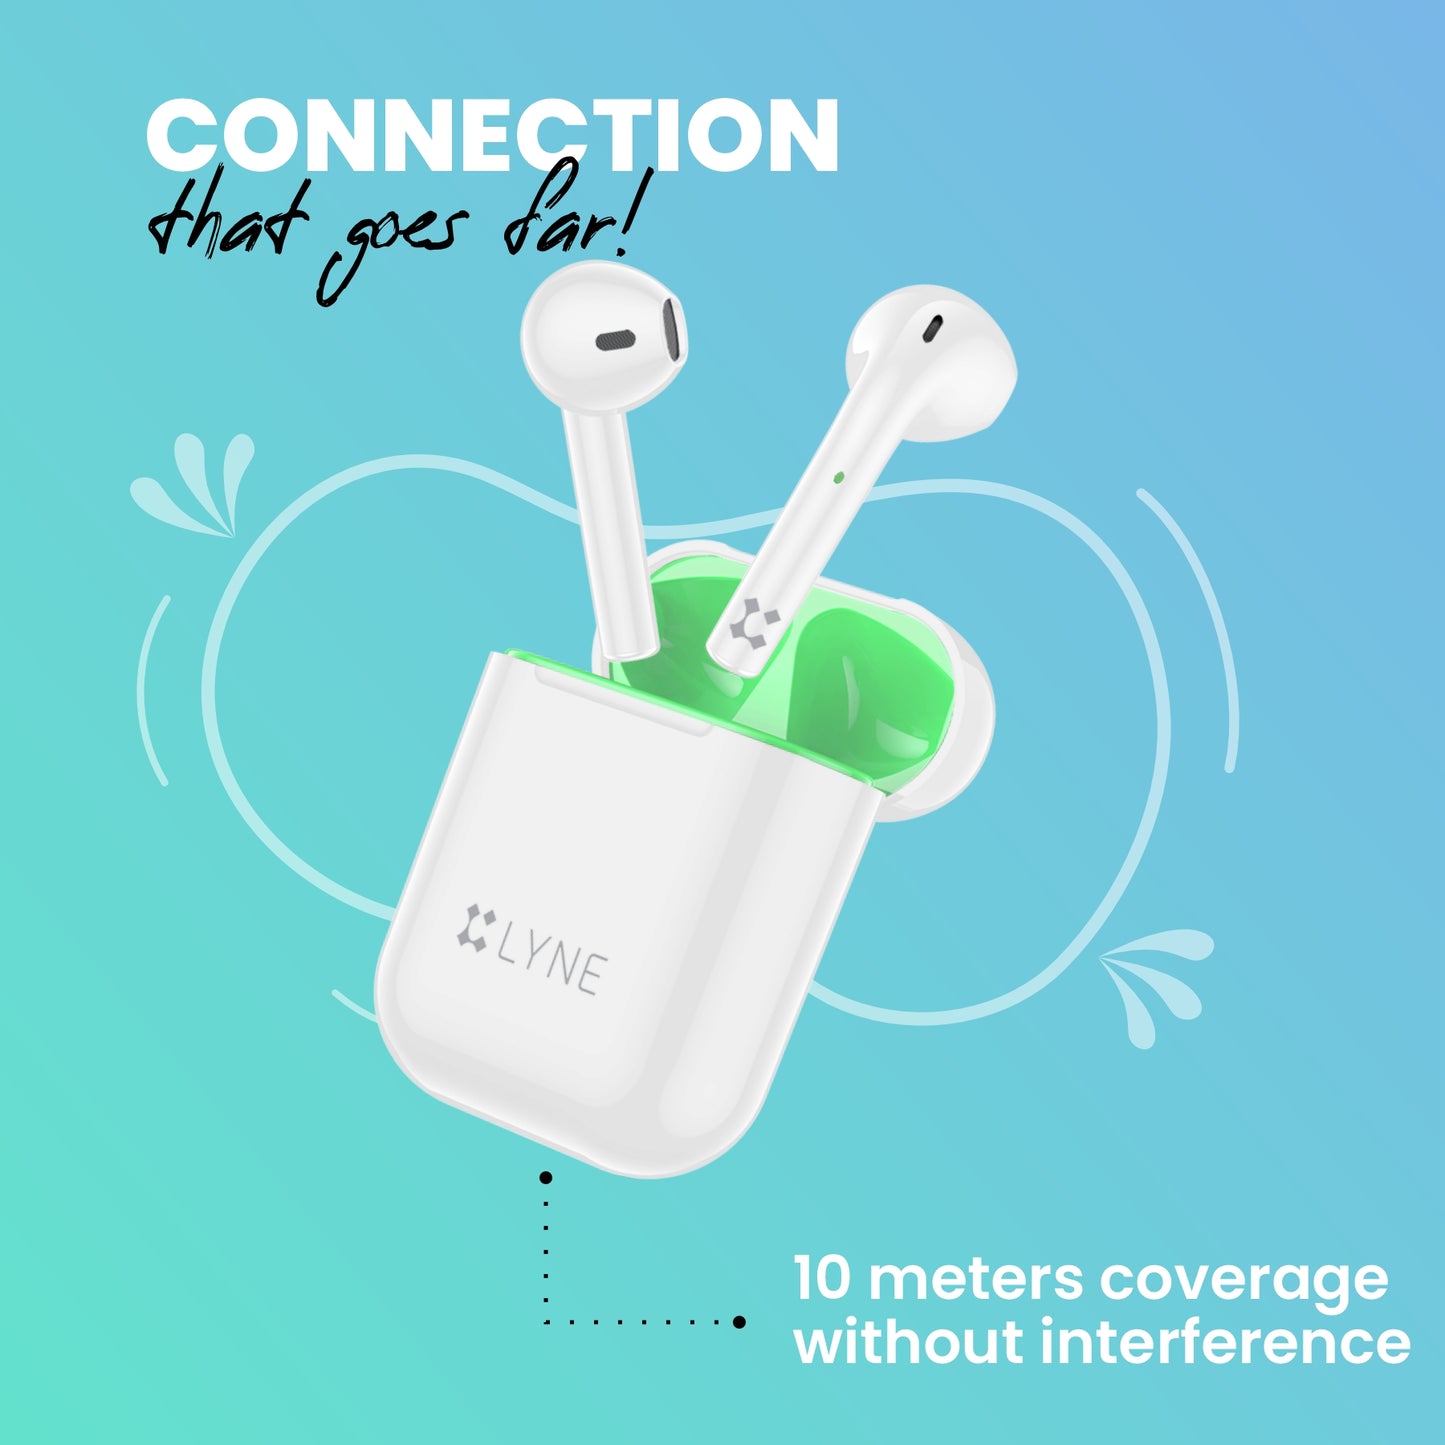 LYNE CoolPods 18 18 Hours Music Time True Wireless Earbuds with Quick Auto Pairing Feature